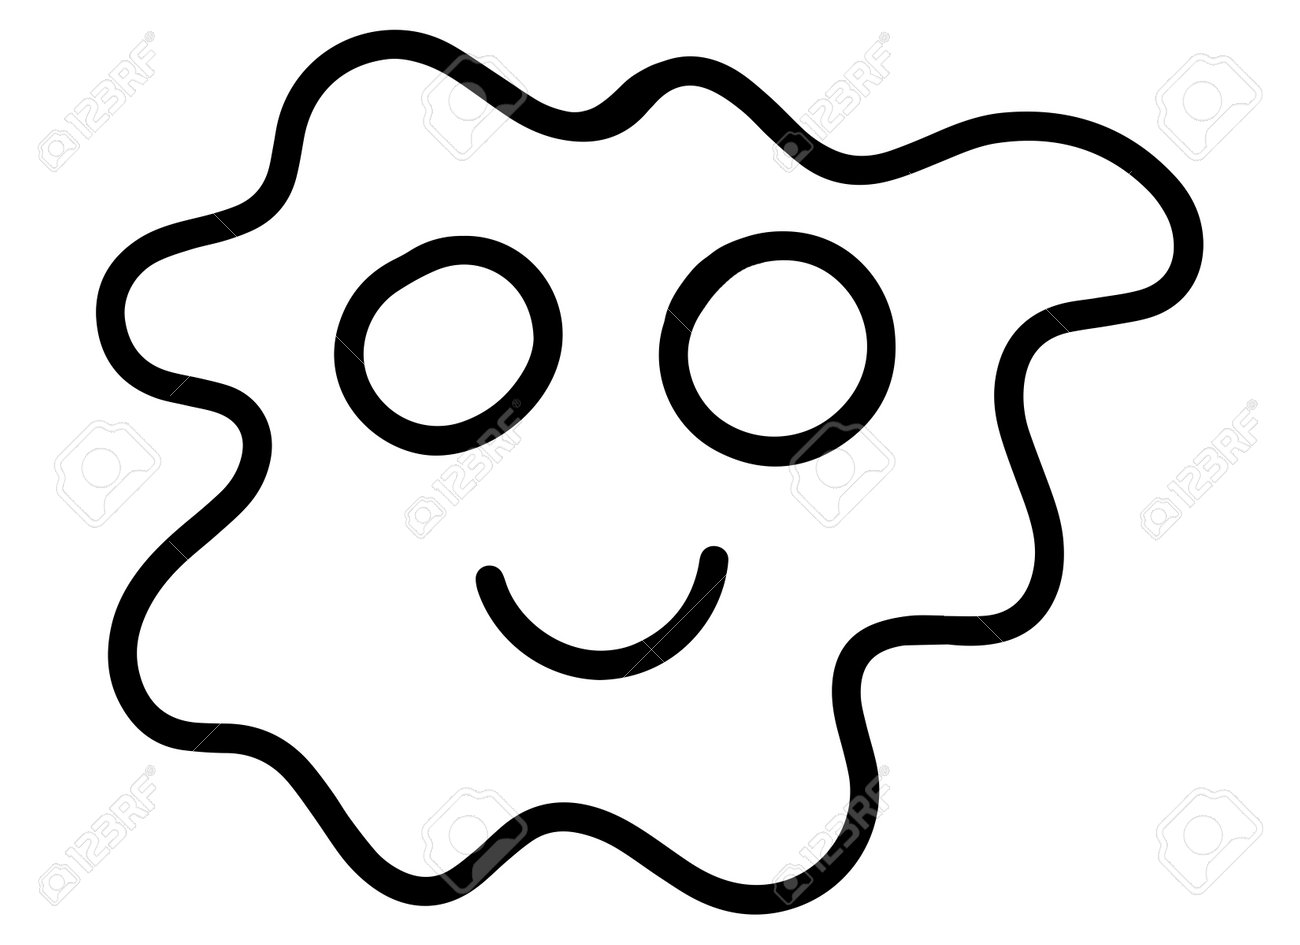 Printable coloring page for kids black and white smiley face isolated illustration stock photo picture and royalty free image image